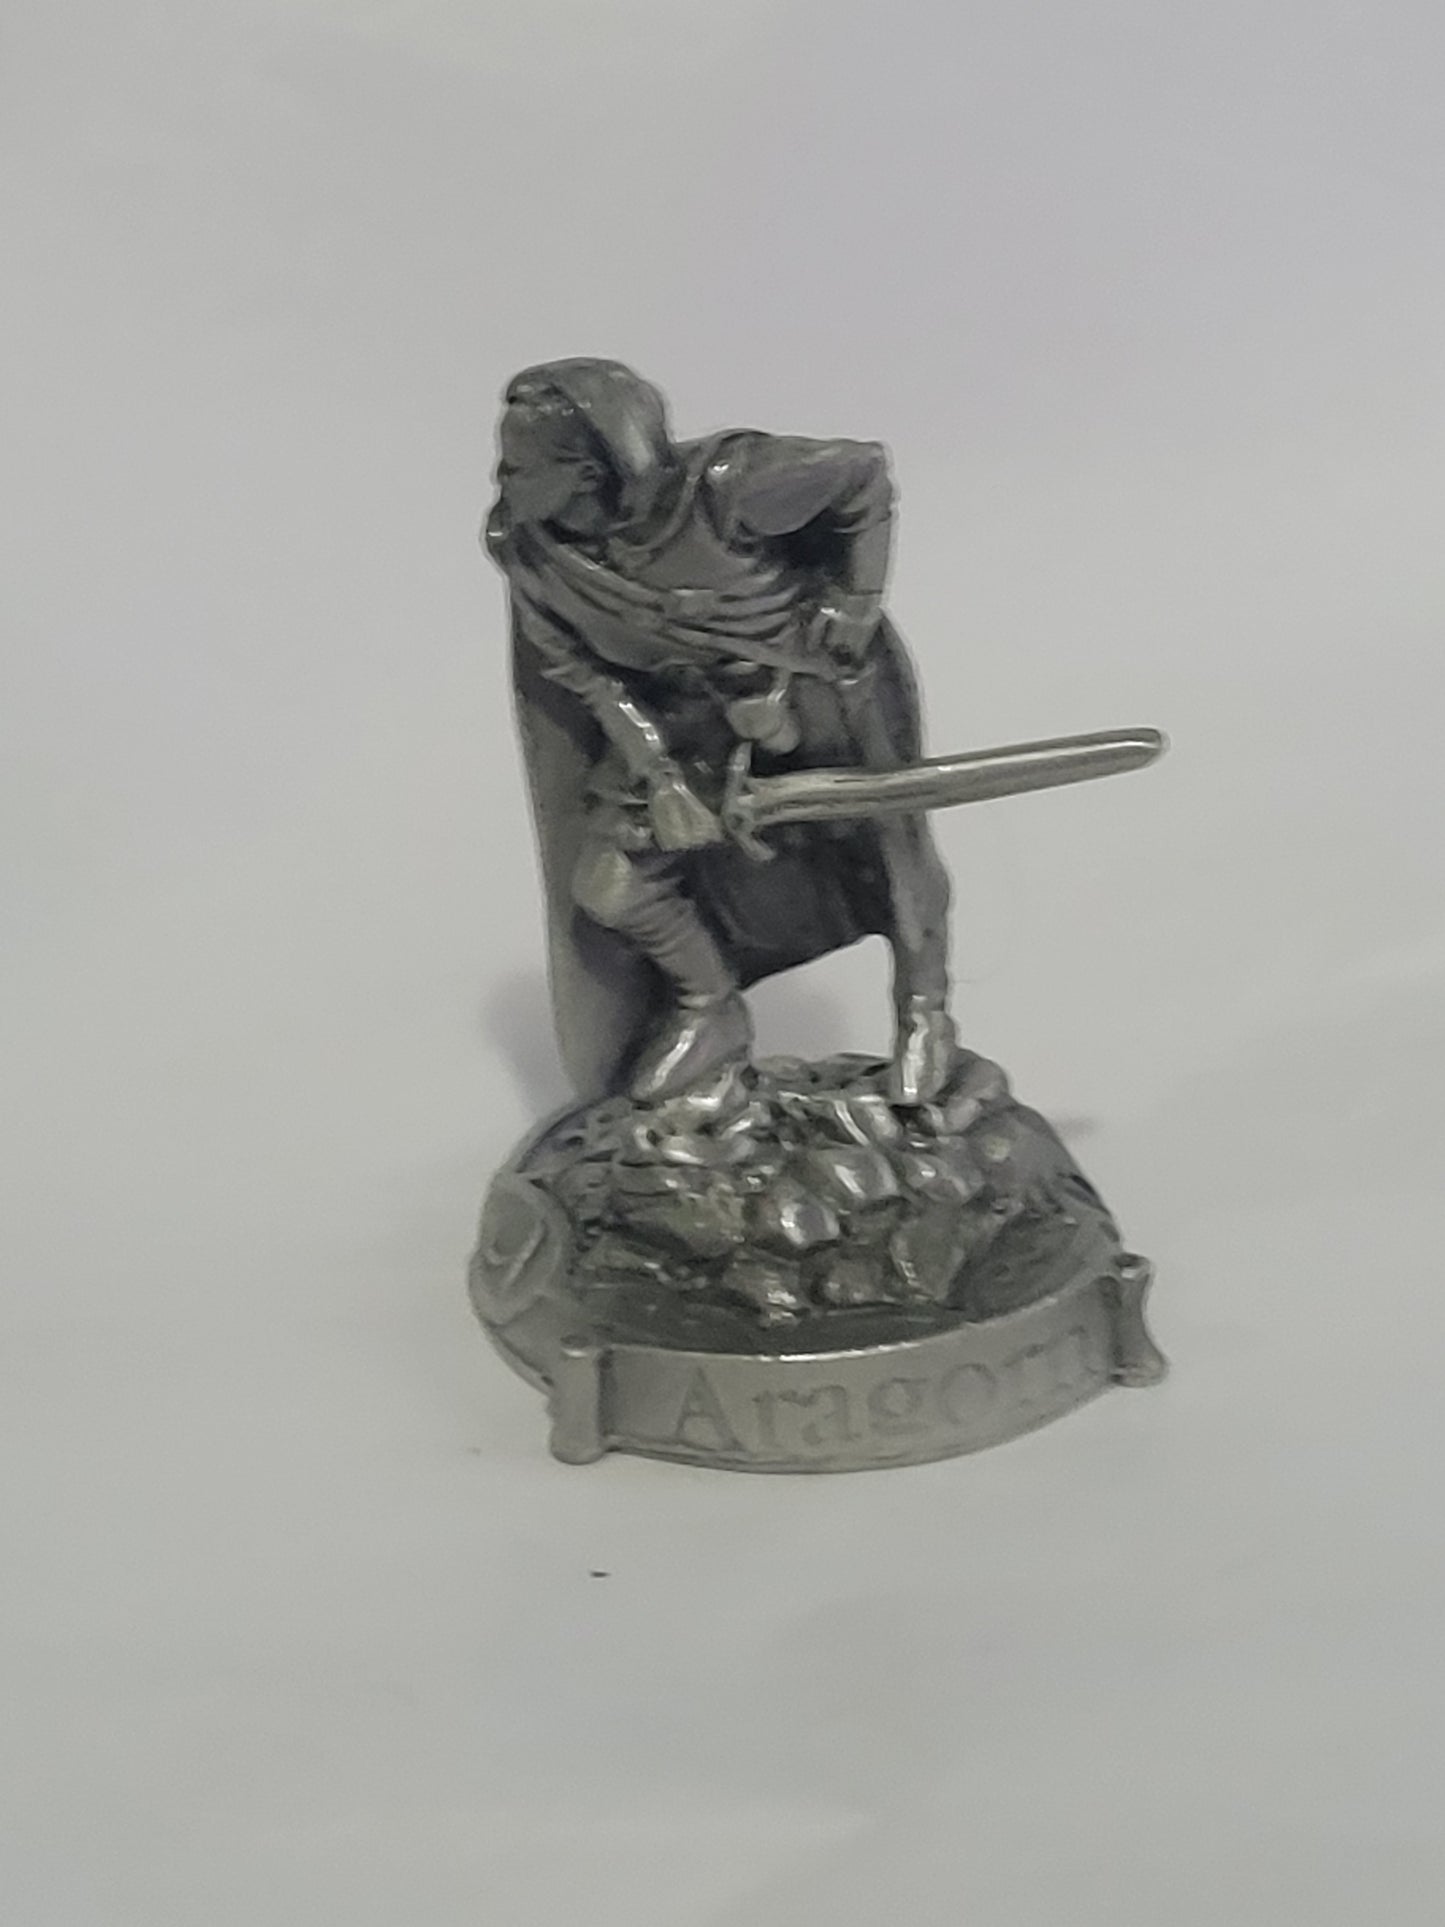 Aragorn from the Lord of the Rings by Rawcliffe Pewter Figurine